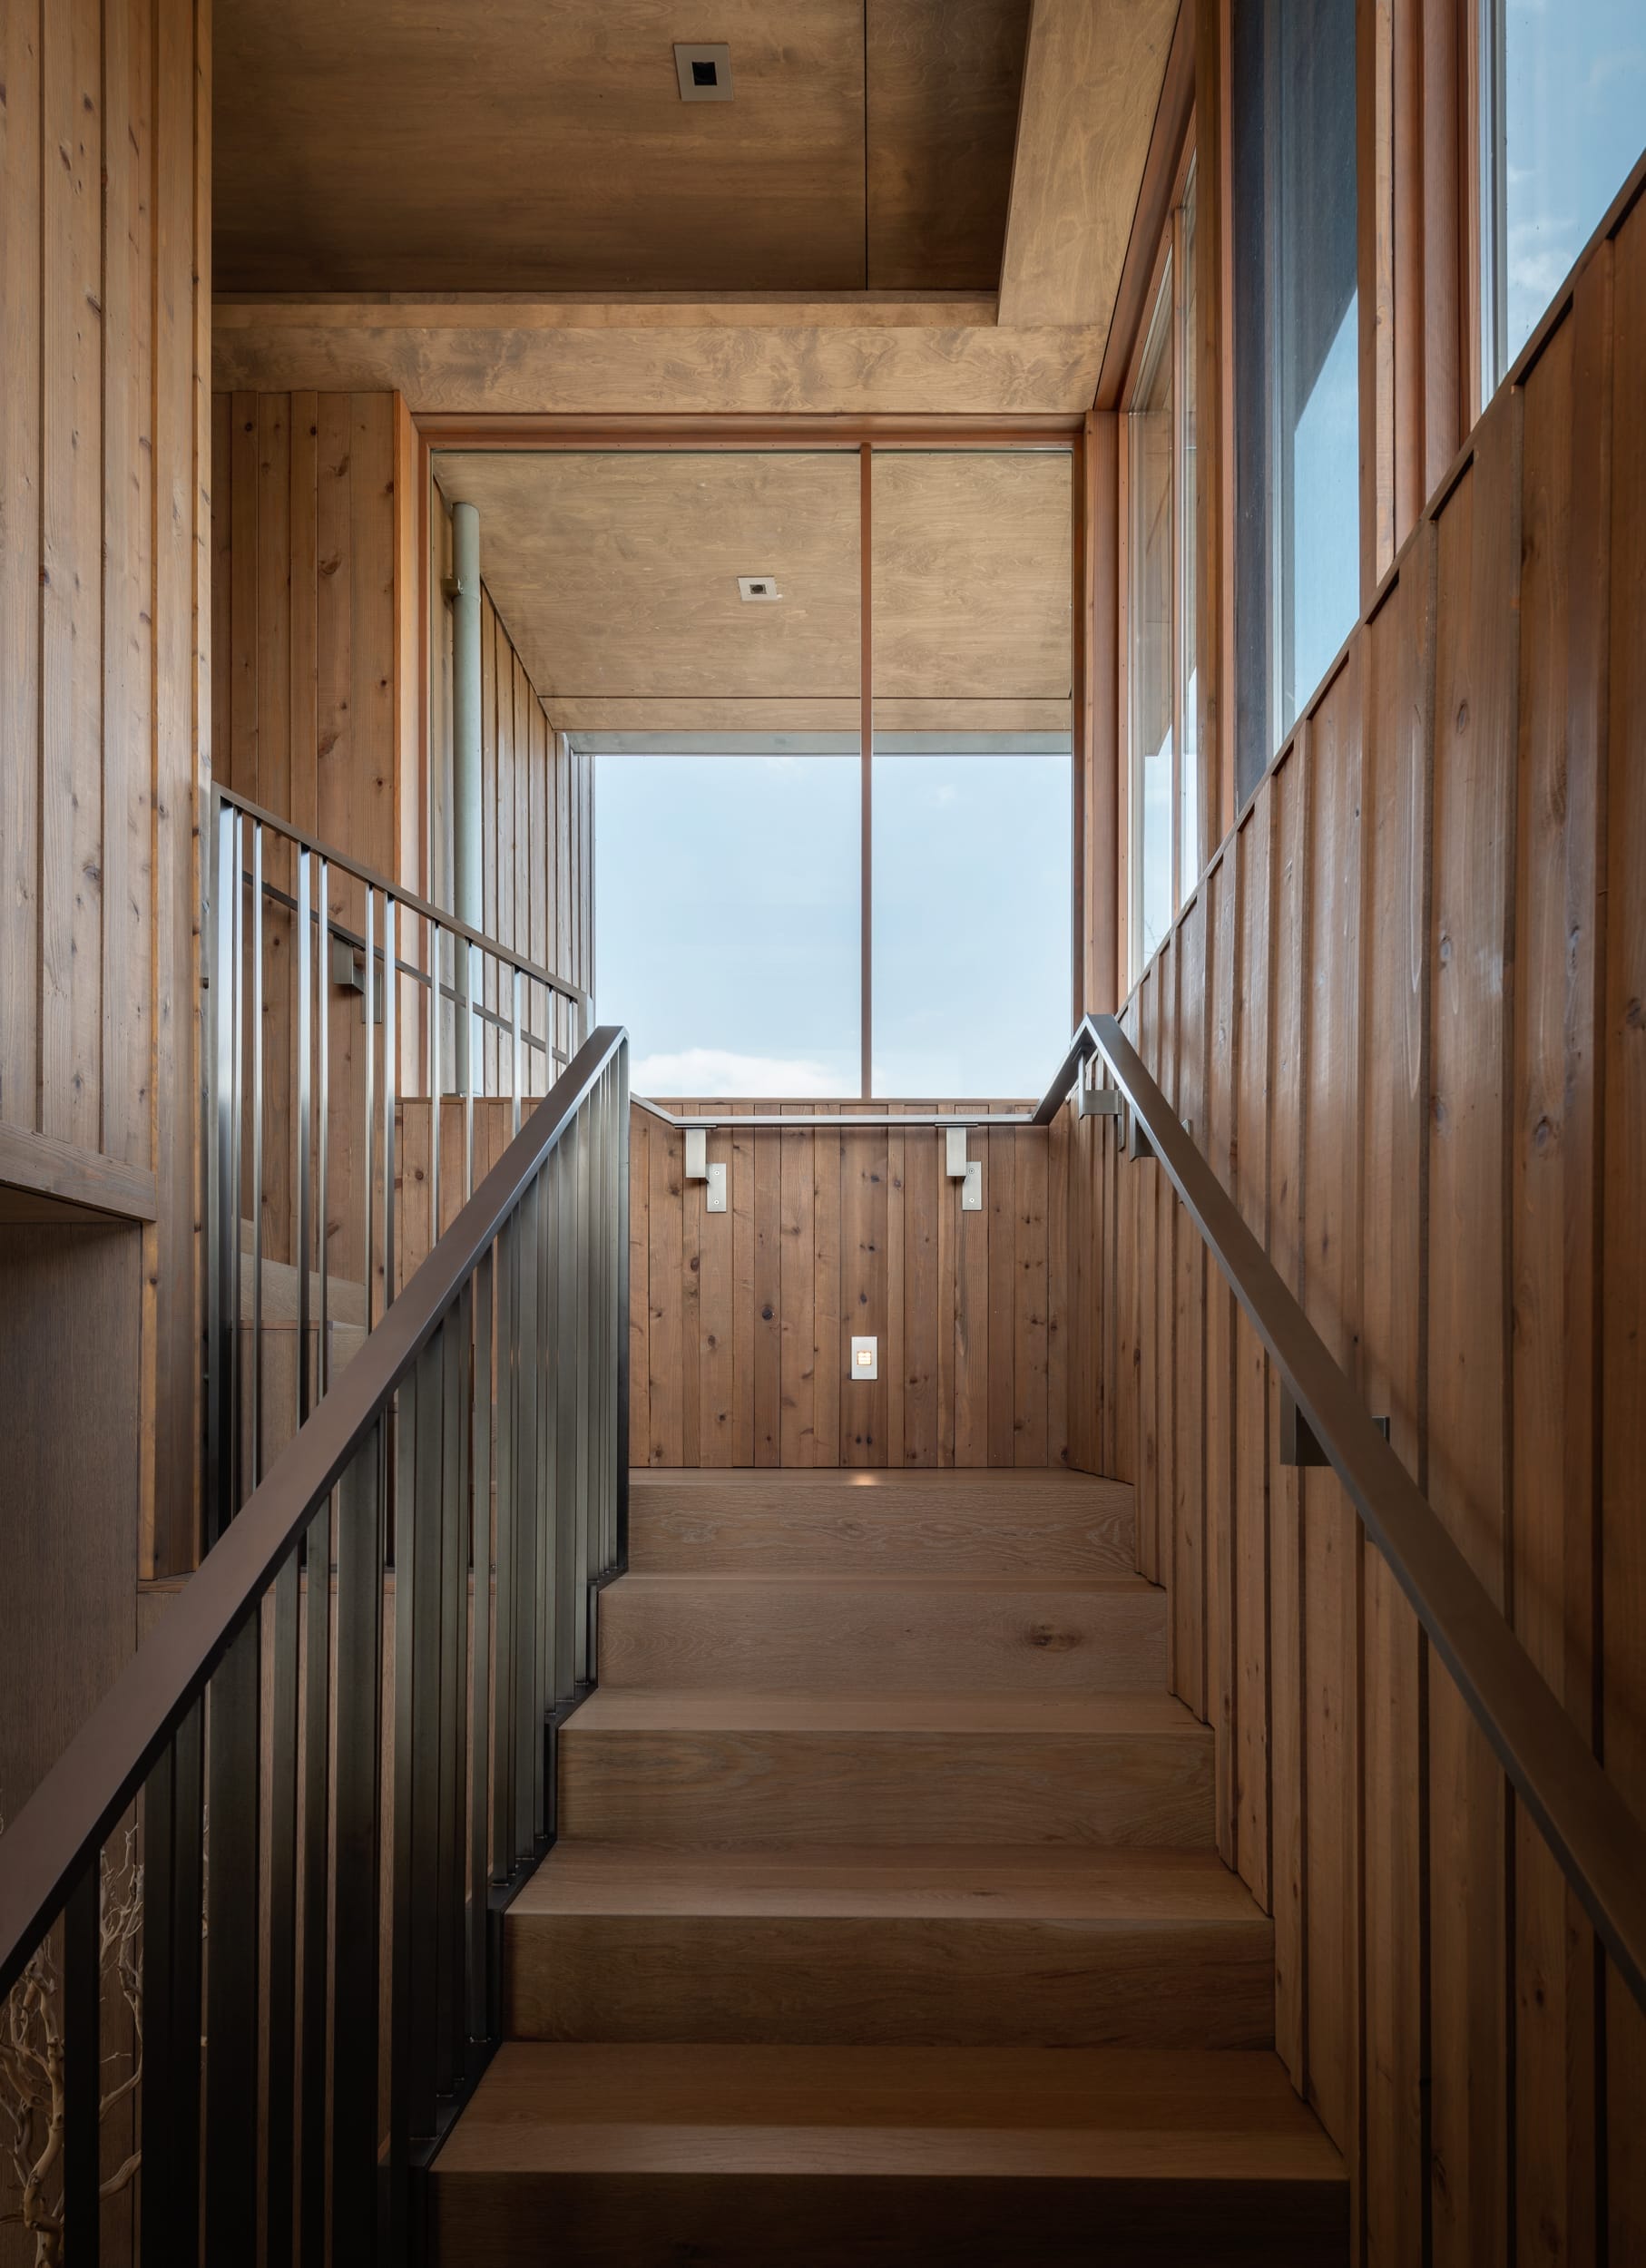 A wooden staircase leading up to a glass wall, expertly crafted by a skilled carpenter.